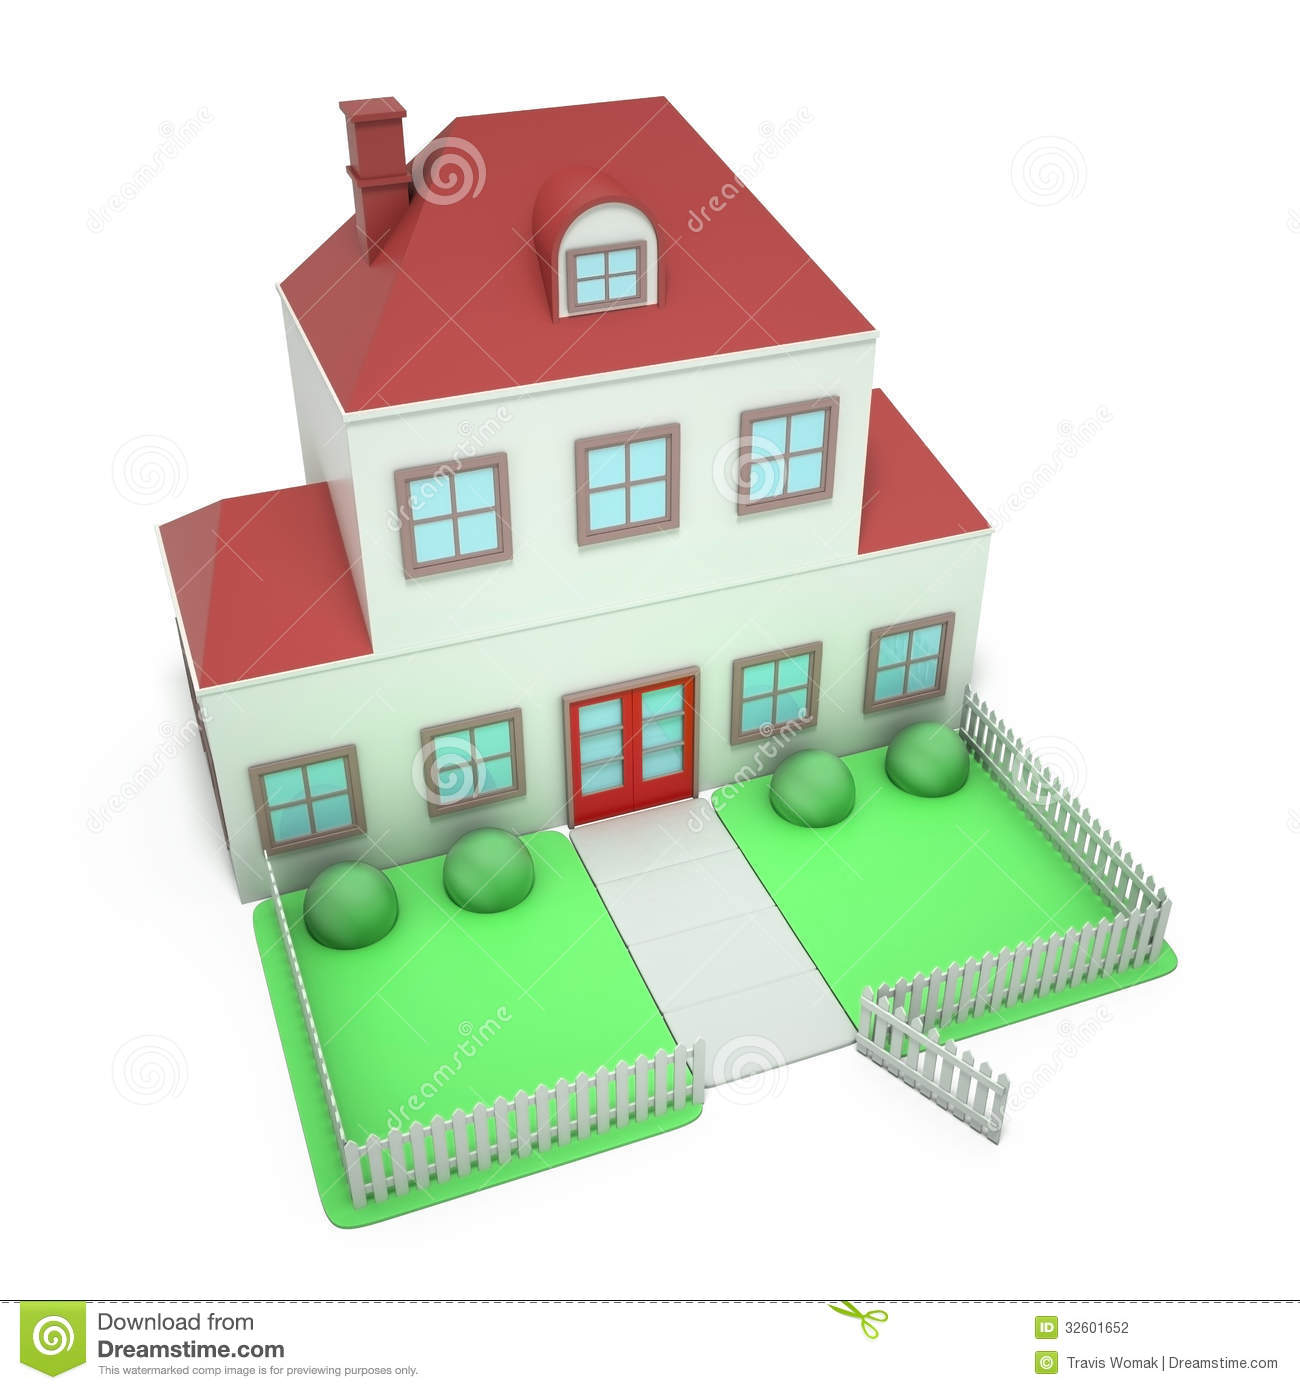 White Picket Fence House Clipart White Picket Fence House Stock